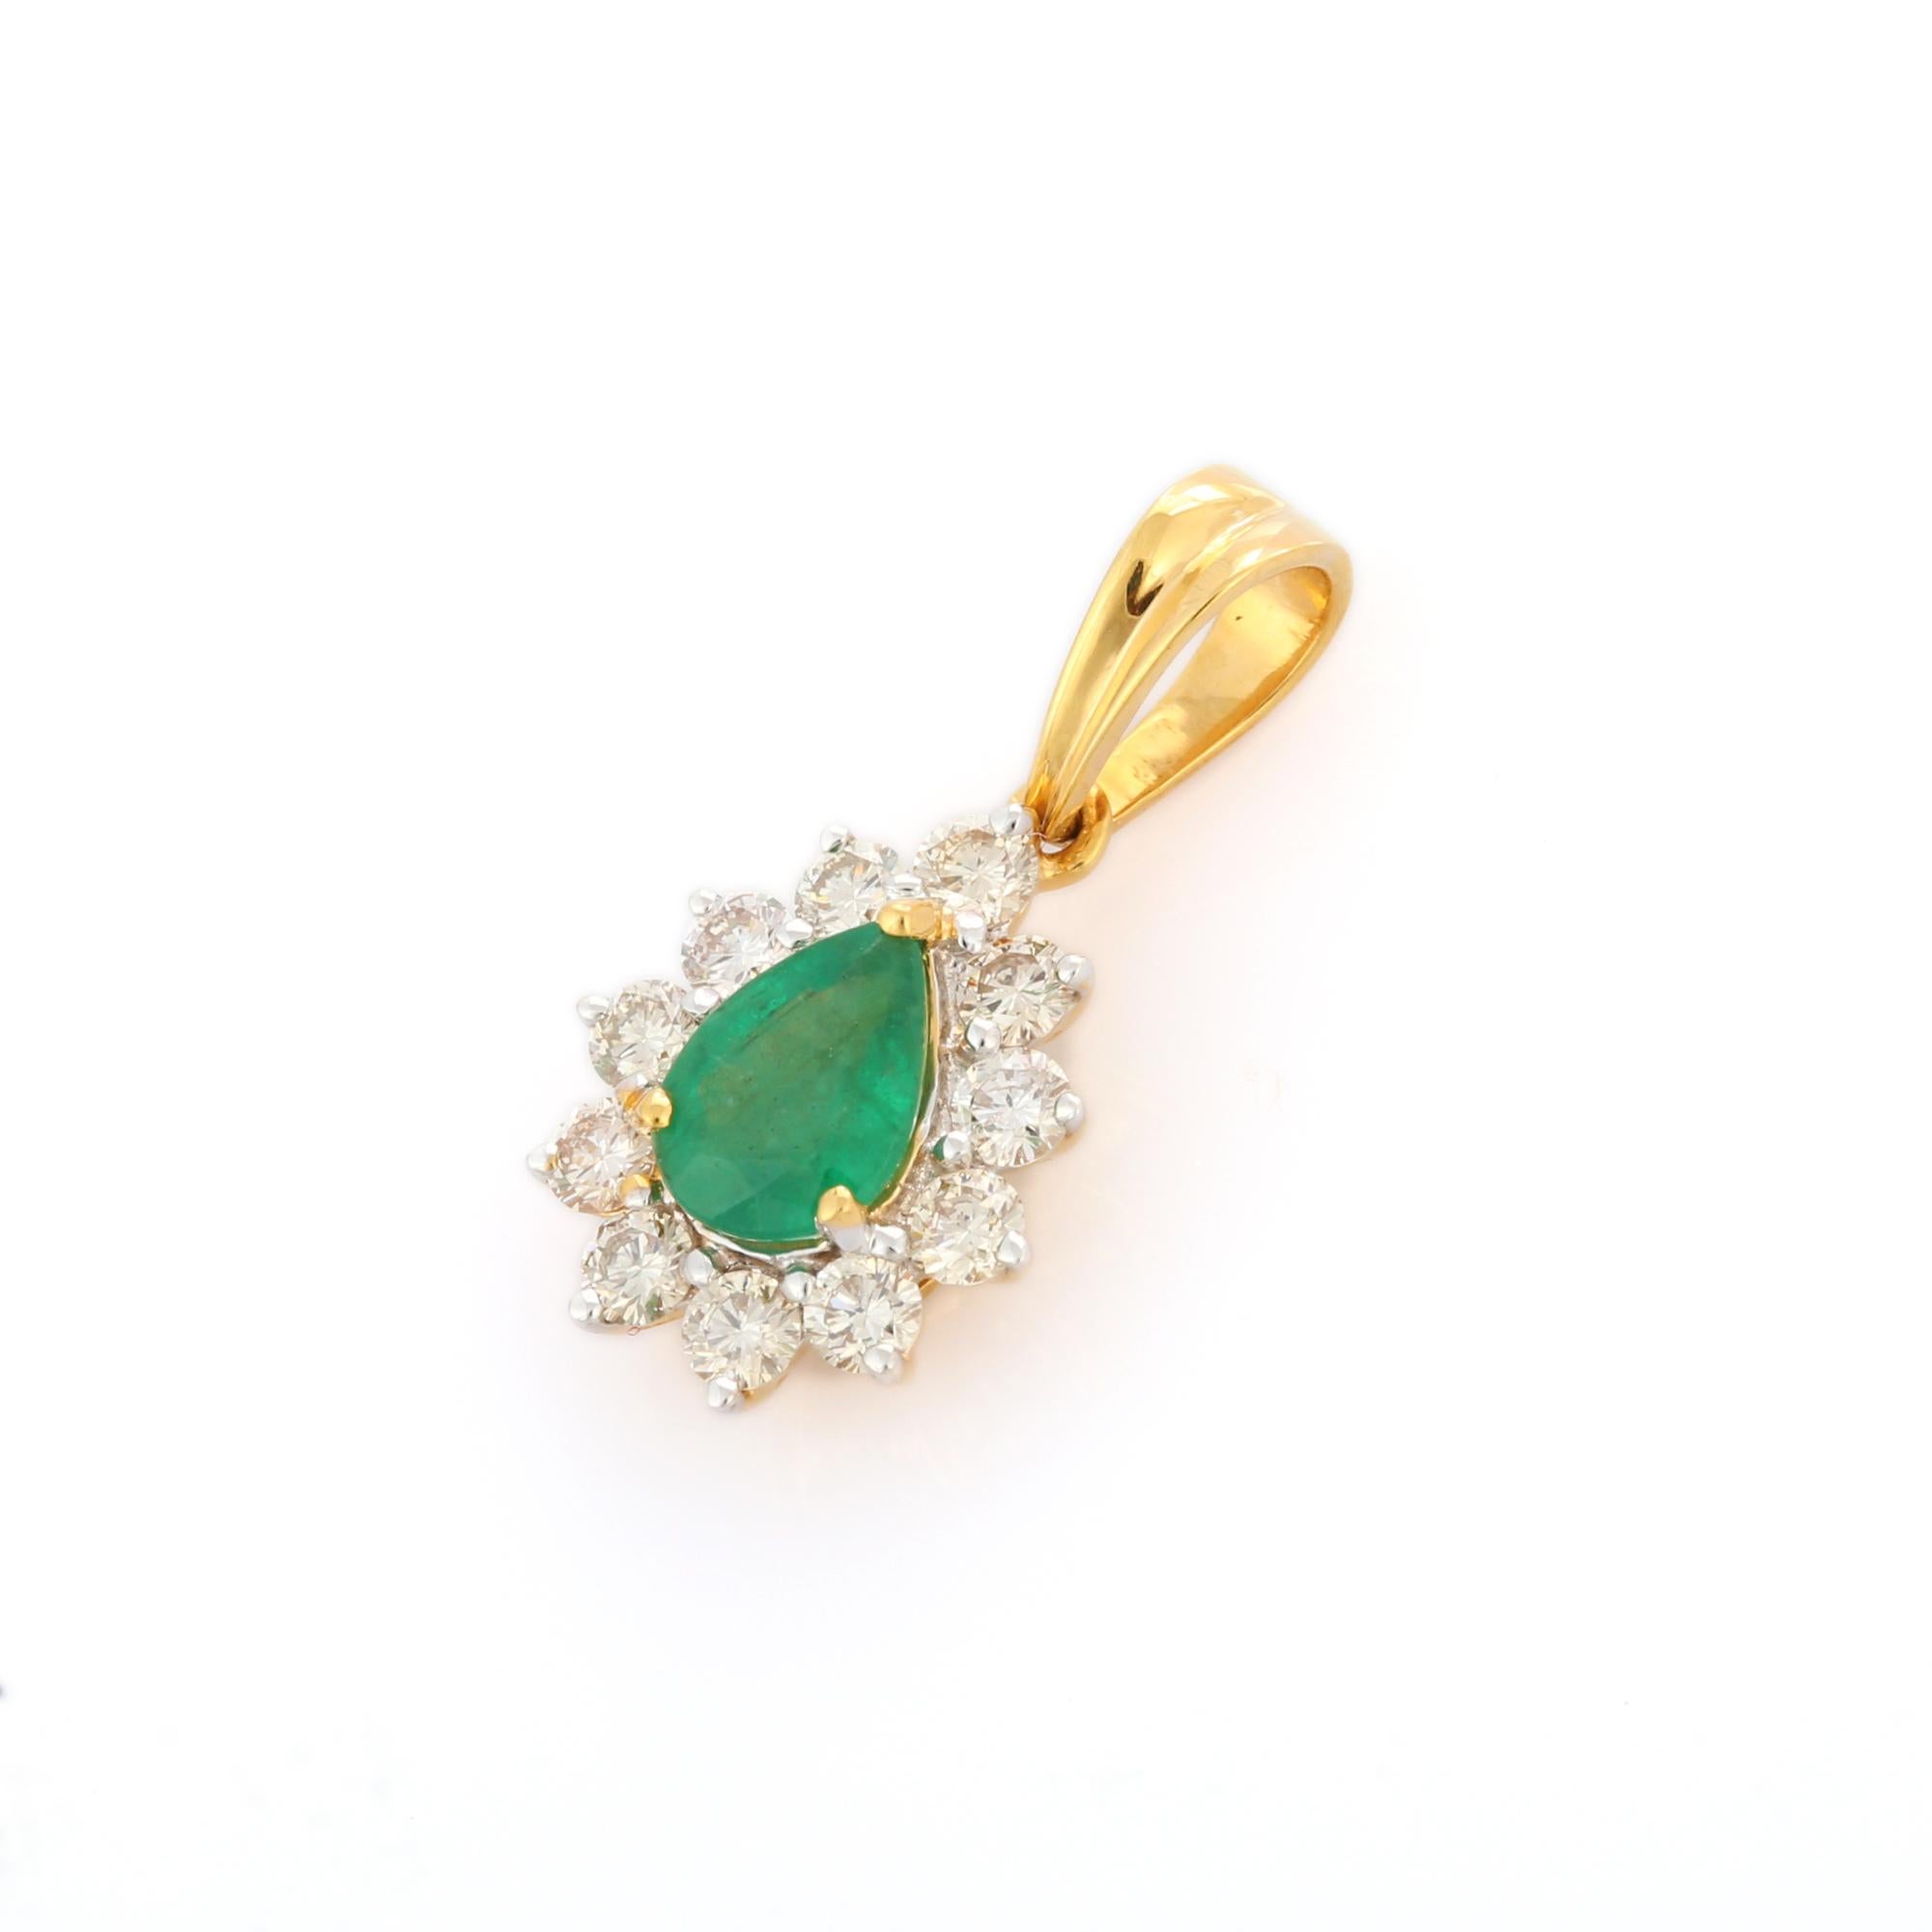 Natural Emerald pendant in 18K Gold. It has a pear cut emerald studded with diamonds that completes your look with a decent touch. Pendants are used to wear or gifted to represent love and promises. It's an attractive jewelry piece that goes with